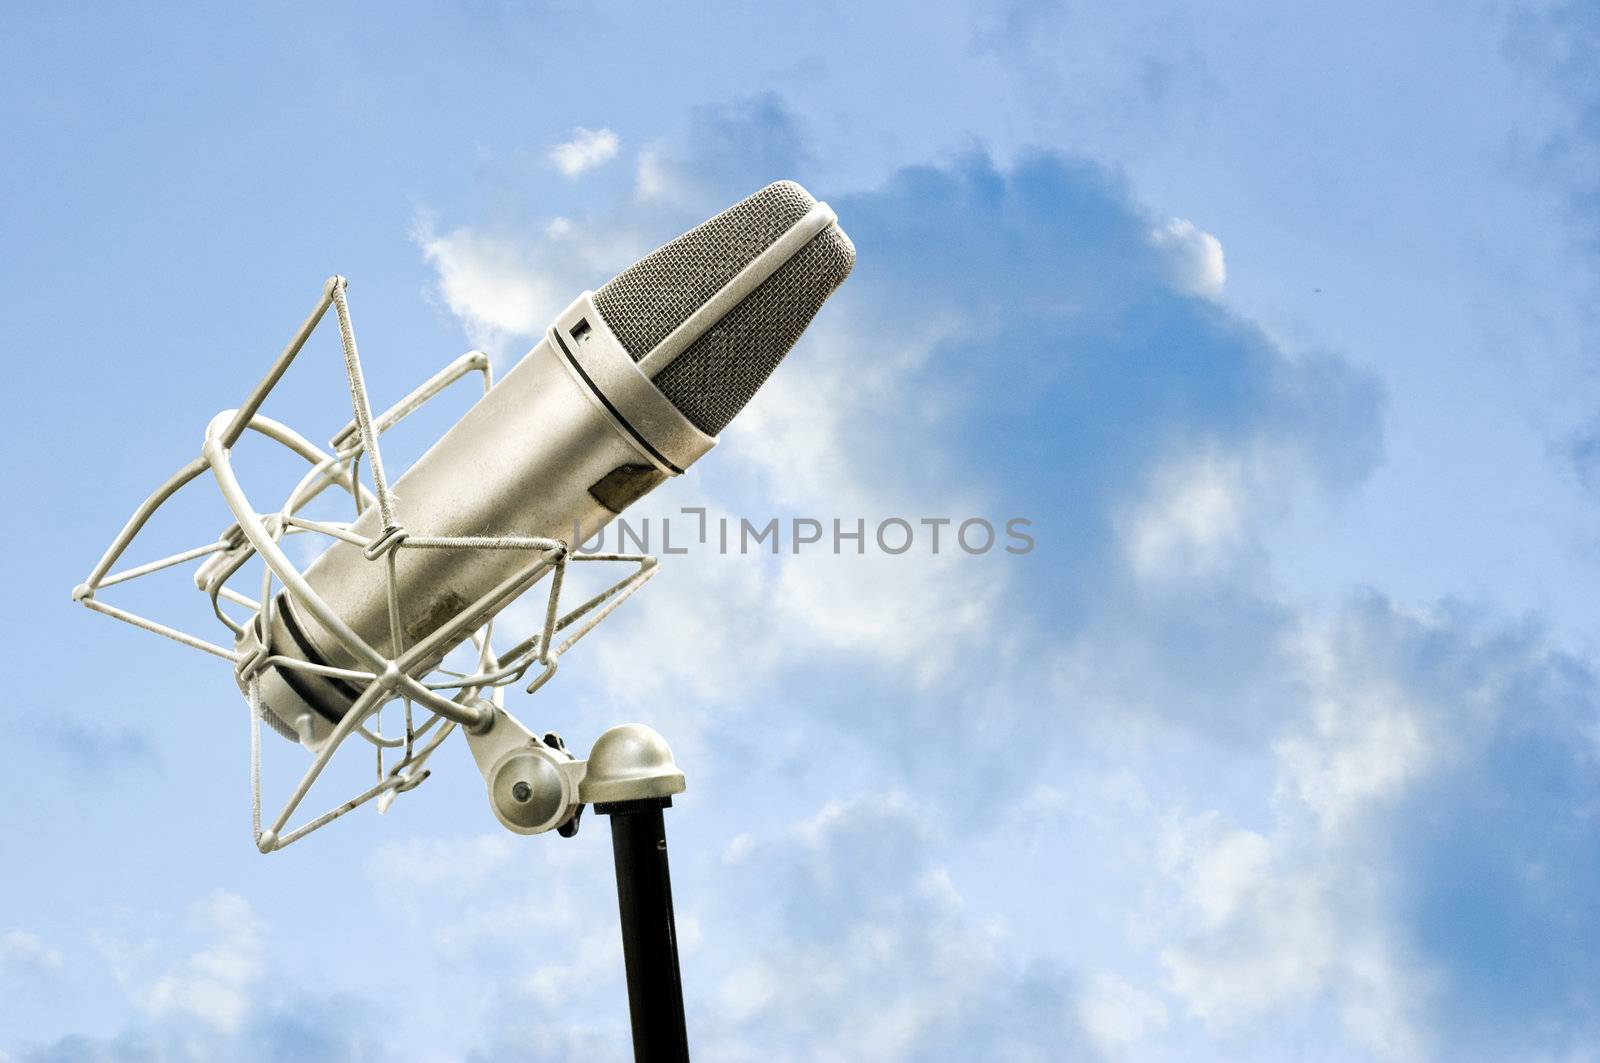 Freedom to sing, Microphone with blue sky